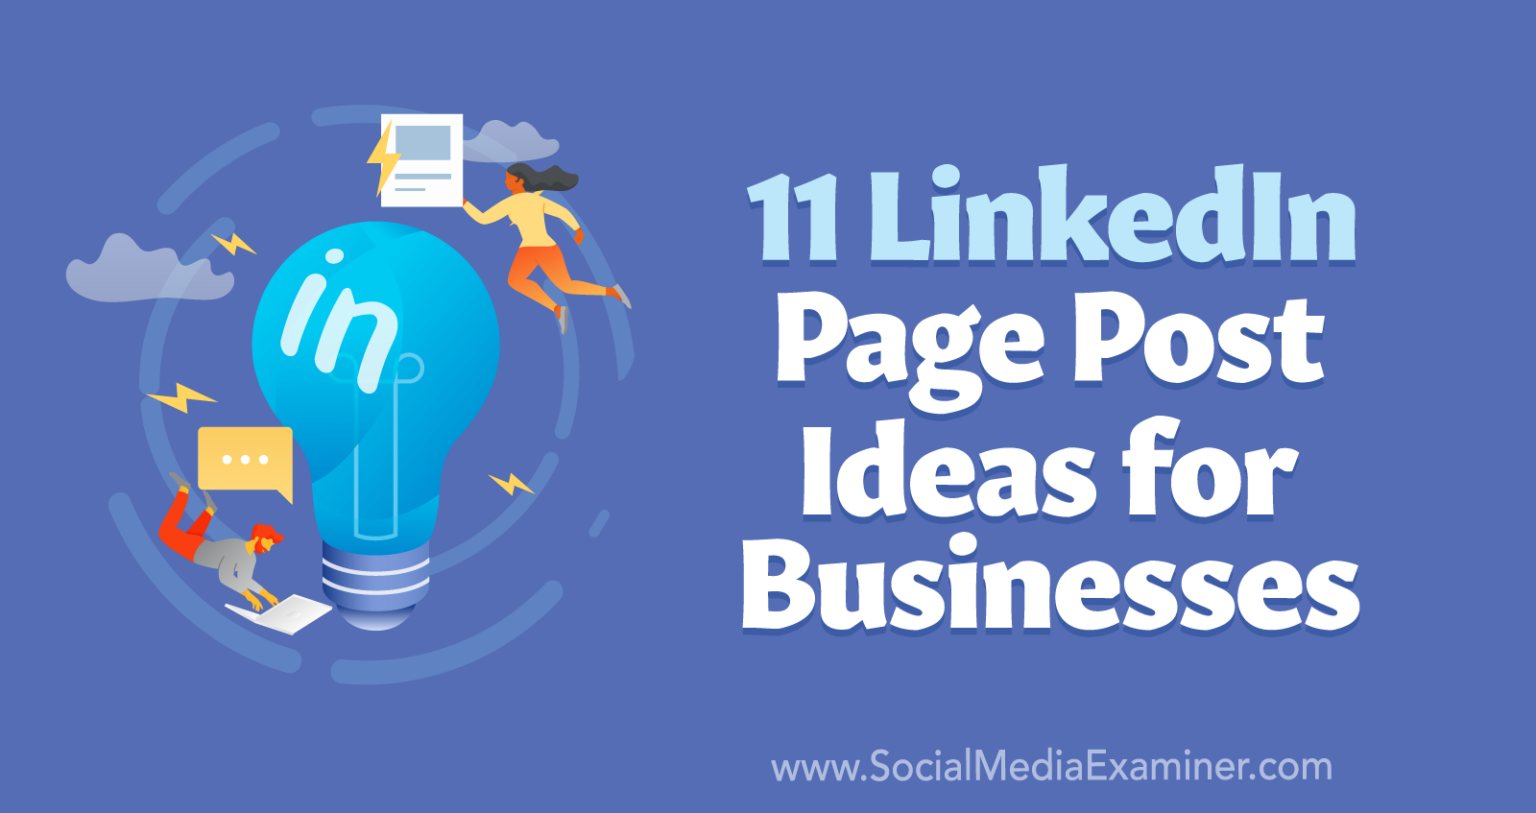 11 LinkedIn Page Post Ideas for Businesses Social Media Examiner